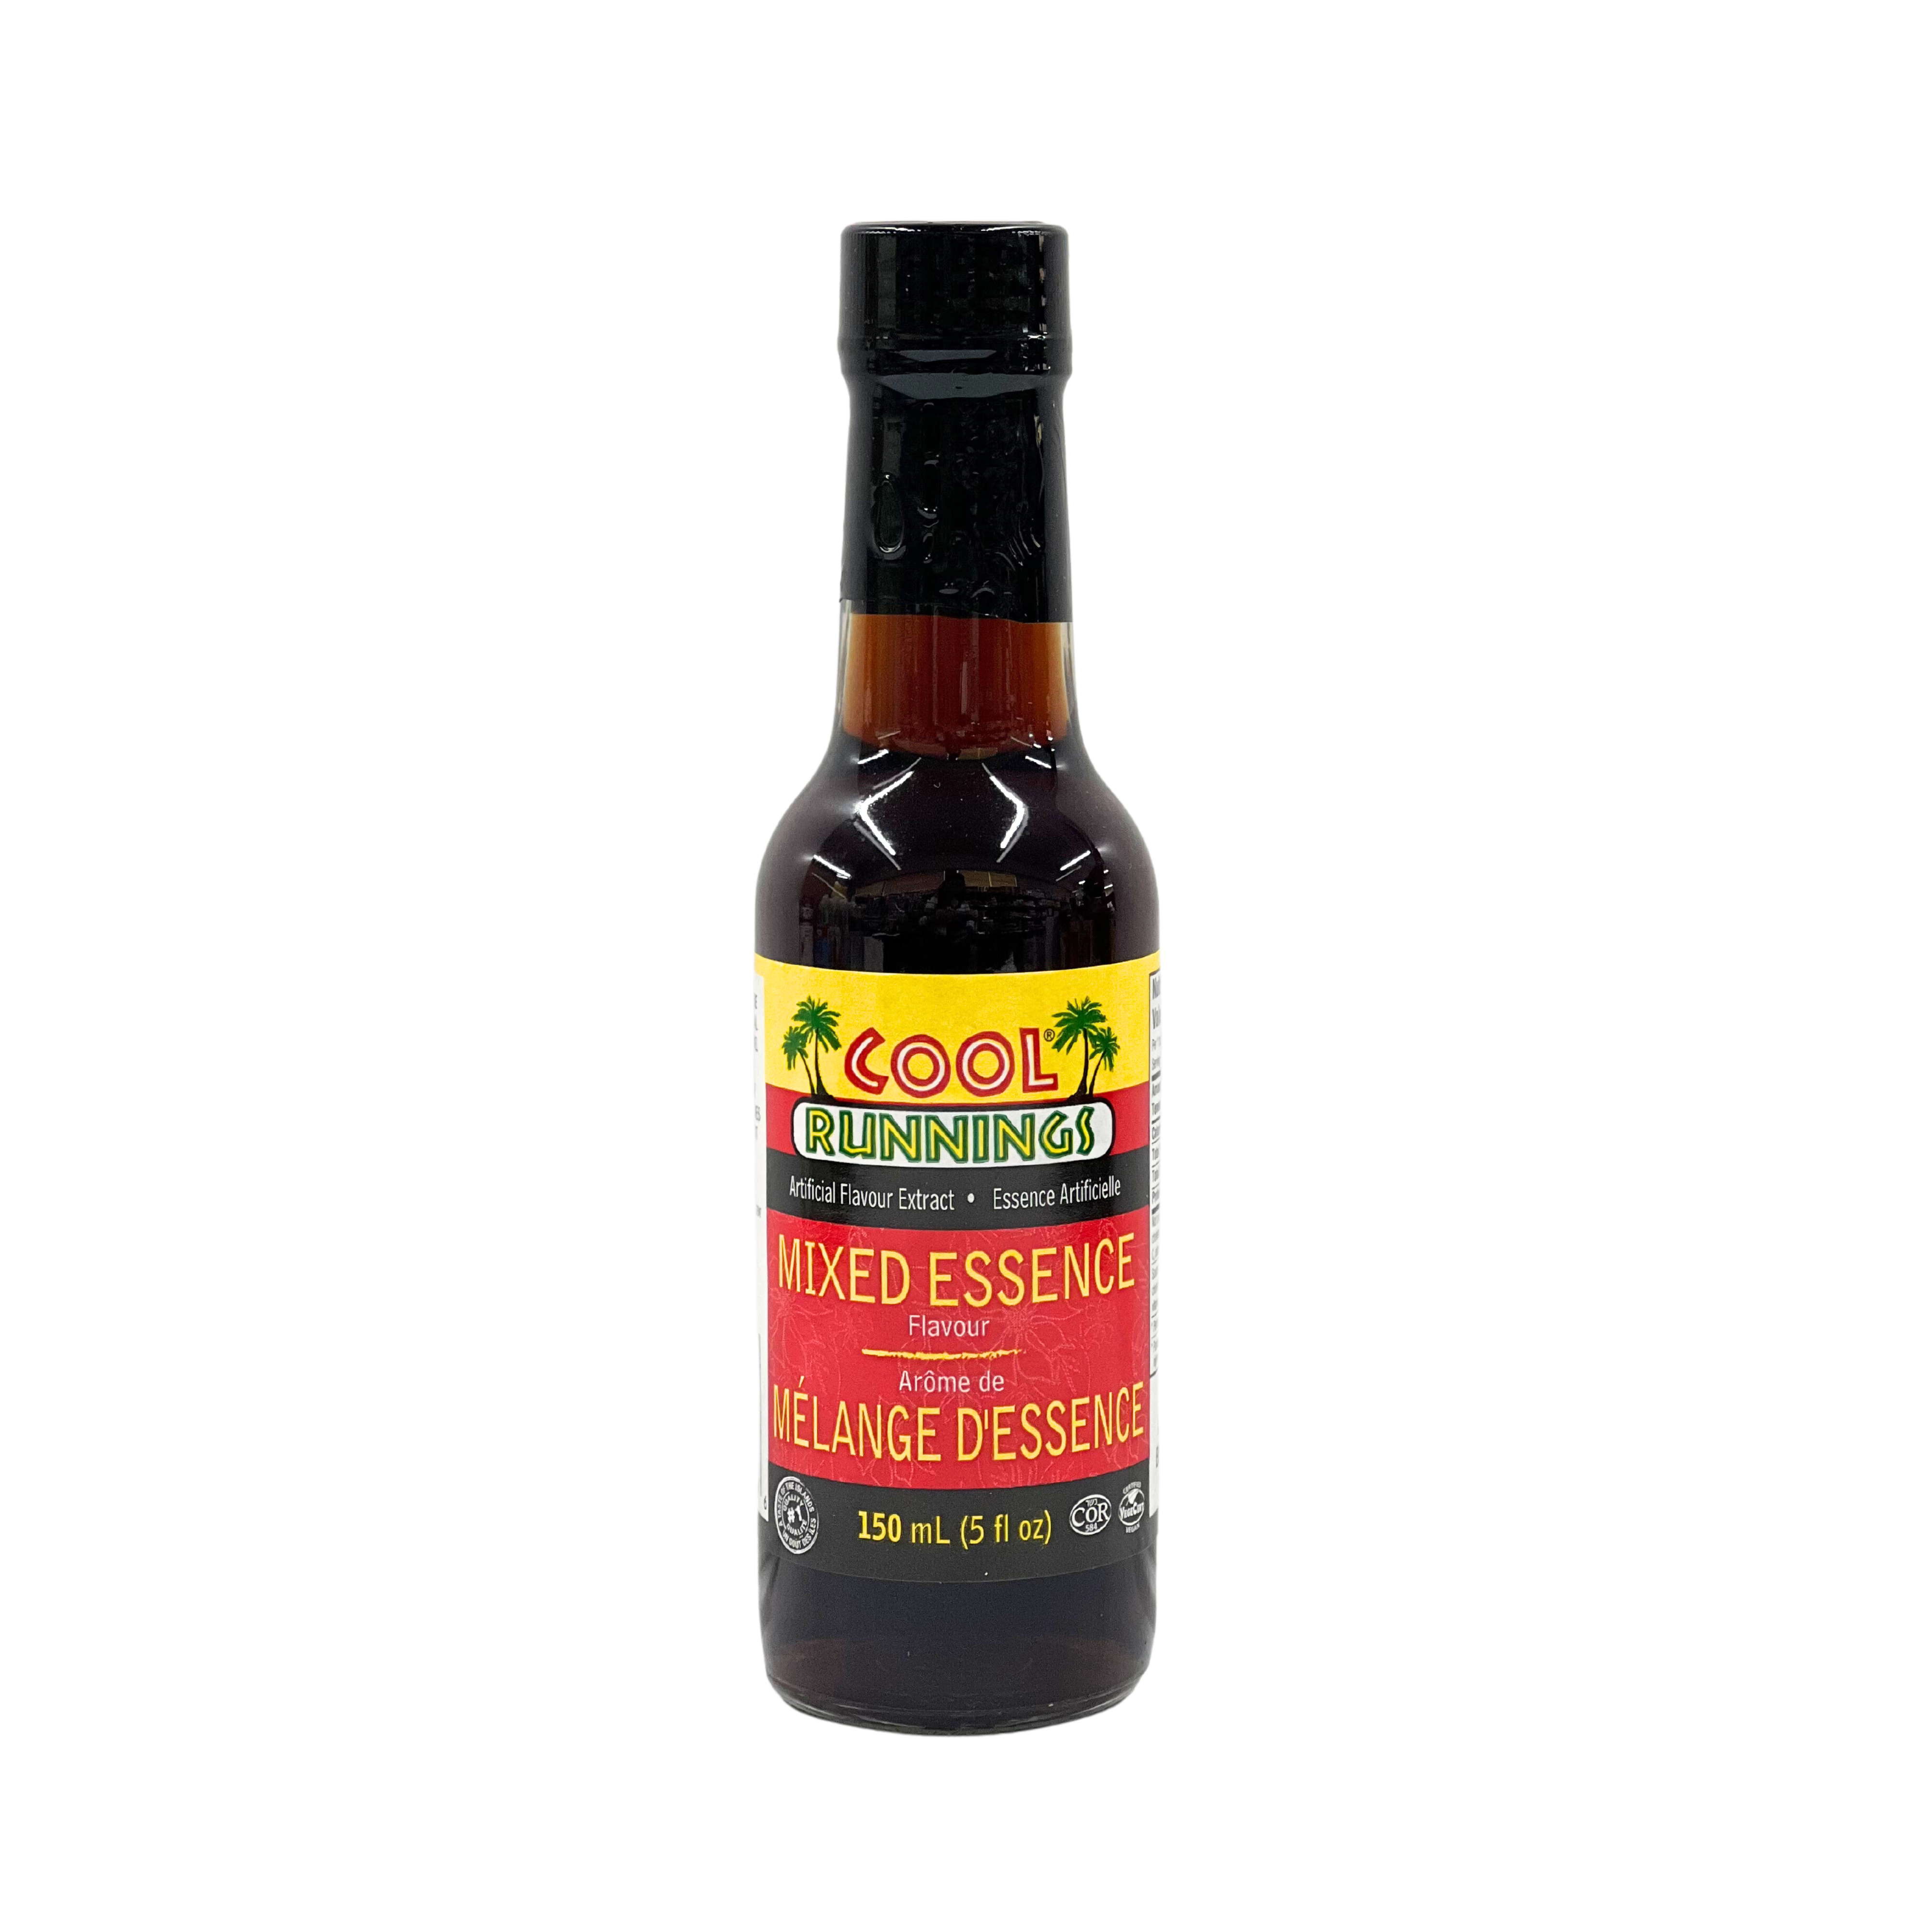 Cool Running Mixed Essence Extract 150ml